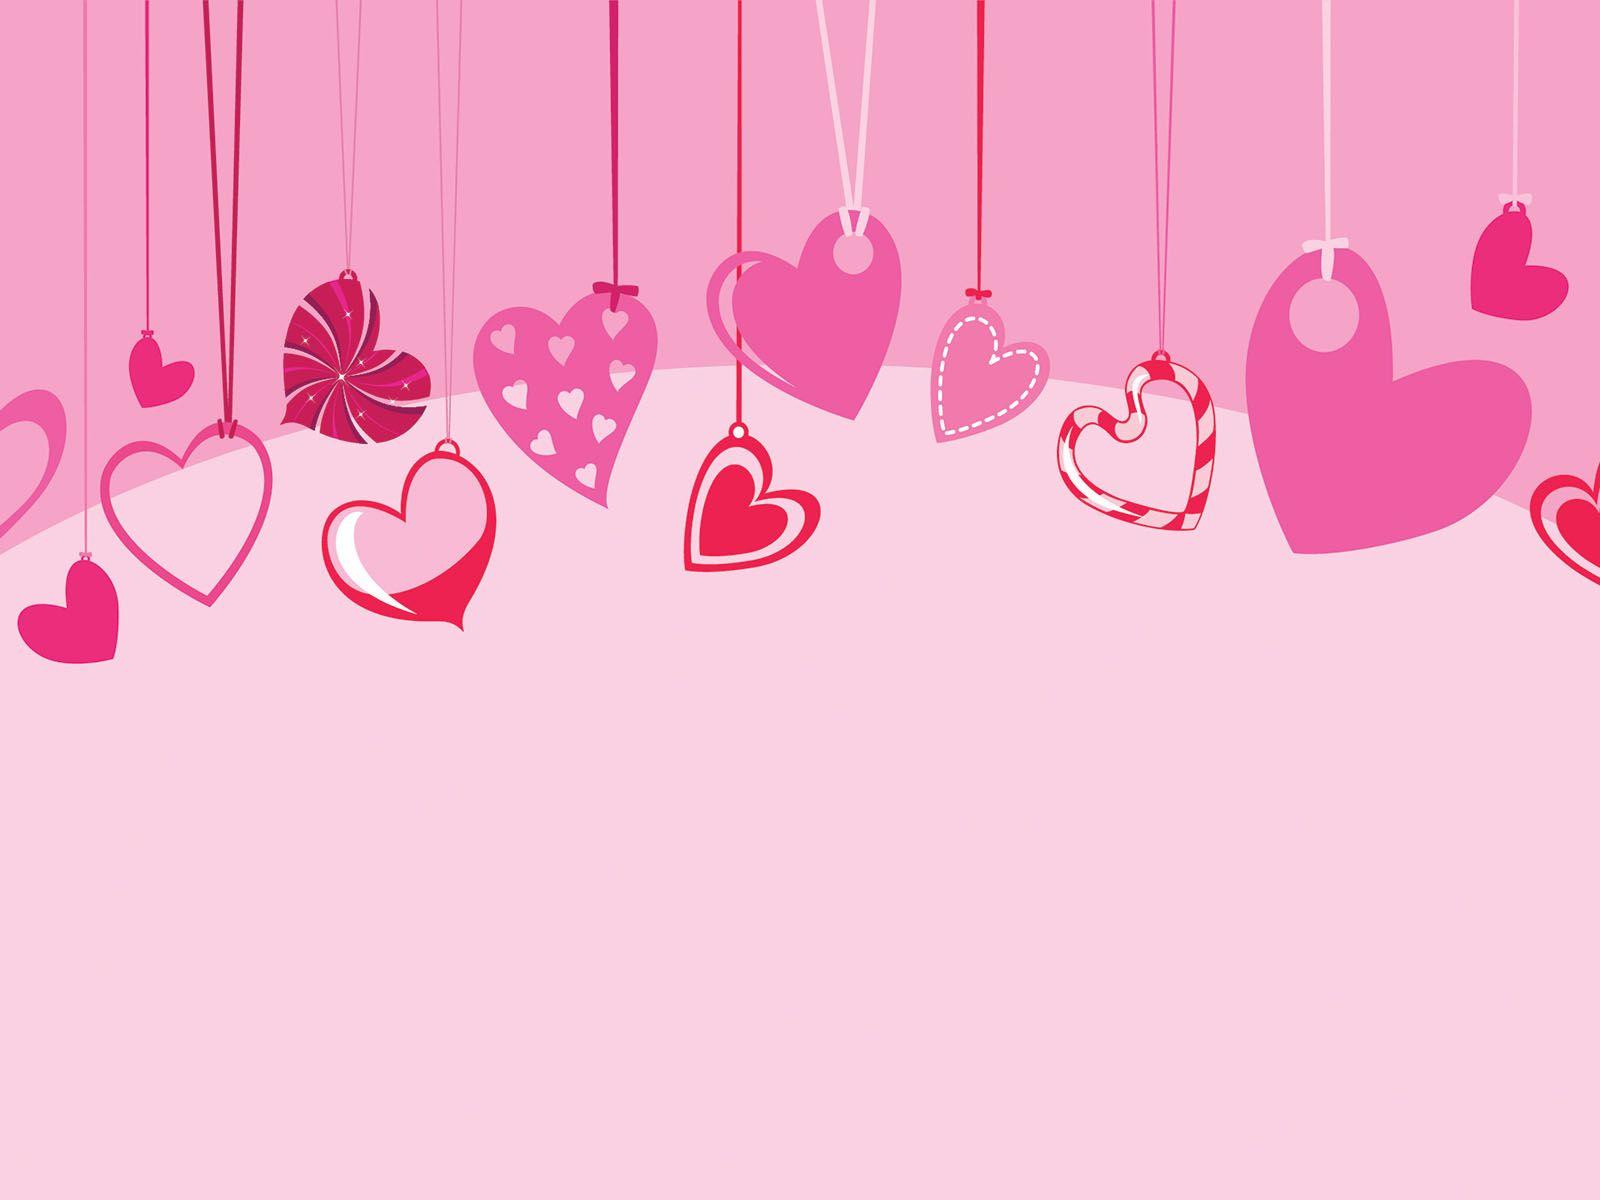 Cute Hearts are Hanging Powerpoint PPT